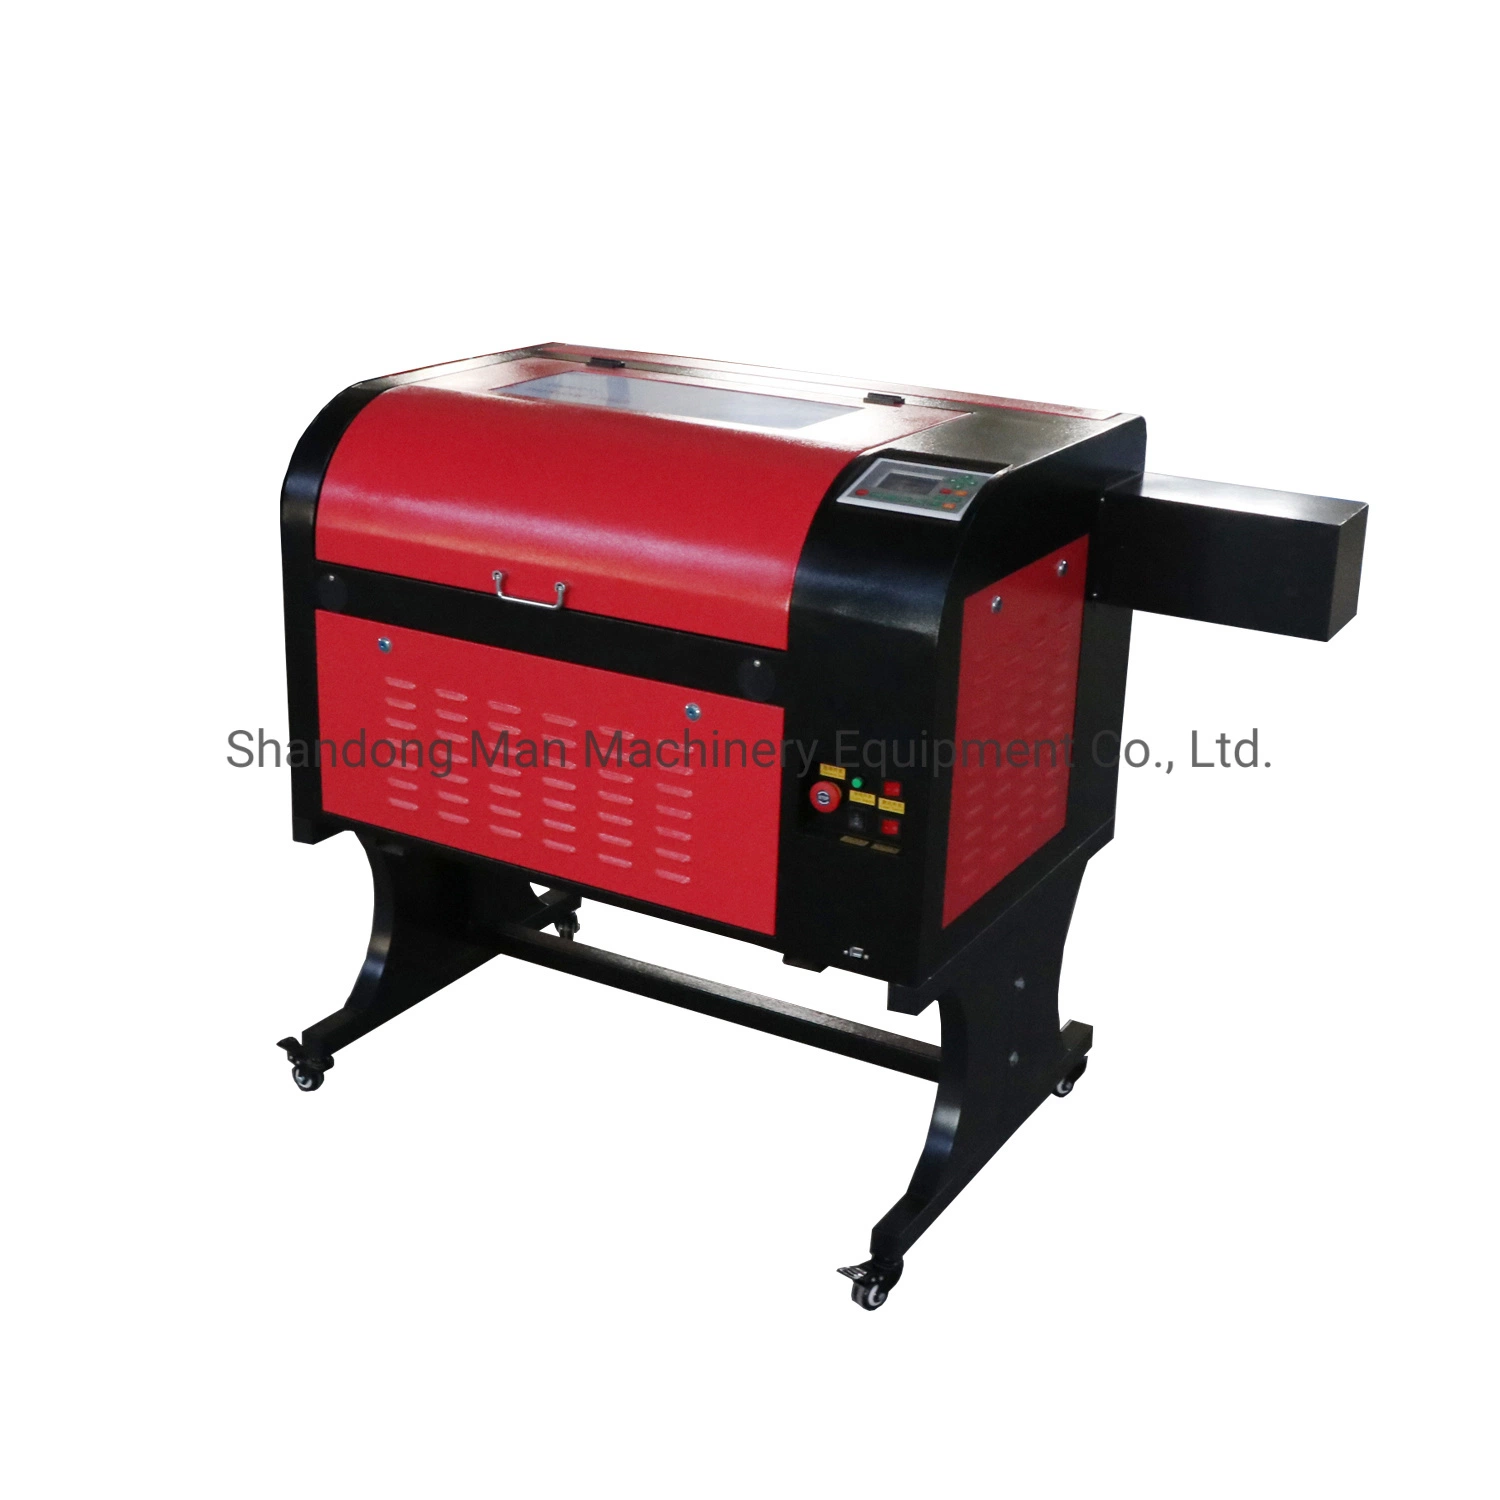 100W Ce/FDA/ISO/SGS CO2 Laser Cutter/Laser Engraving Machine for Acrylic/Plastic/PVC/MDF/Board/Leather/Wood/Ban